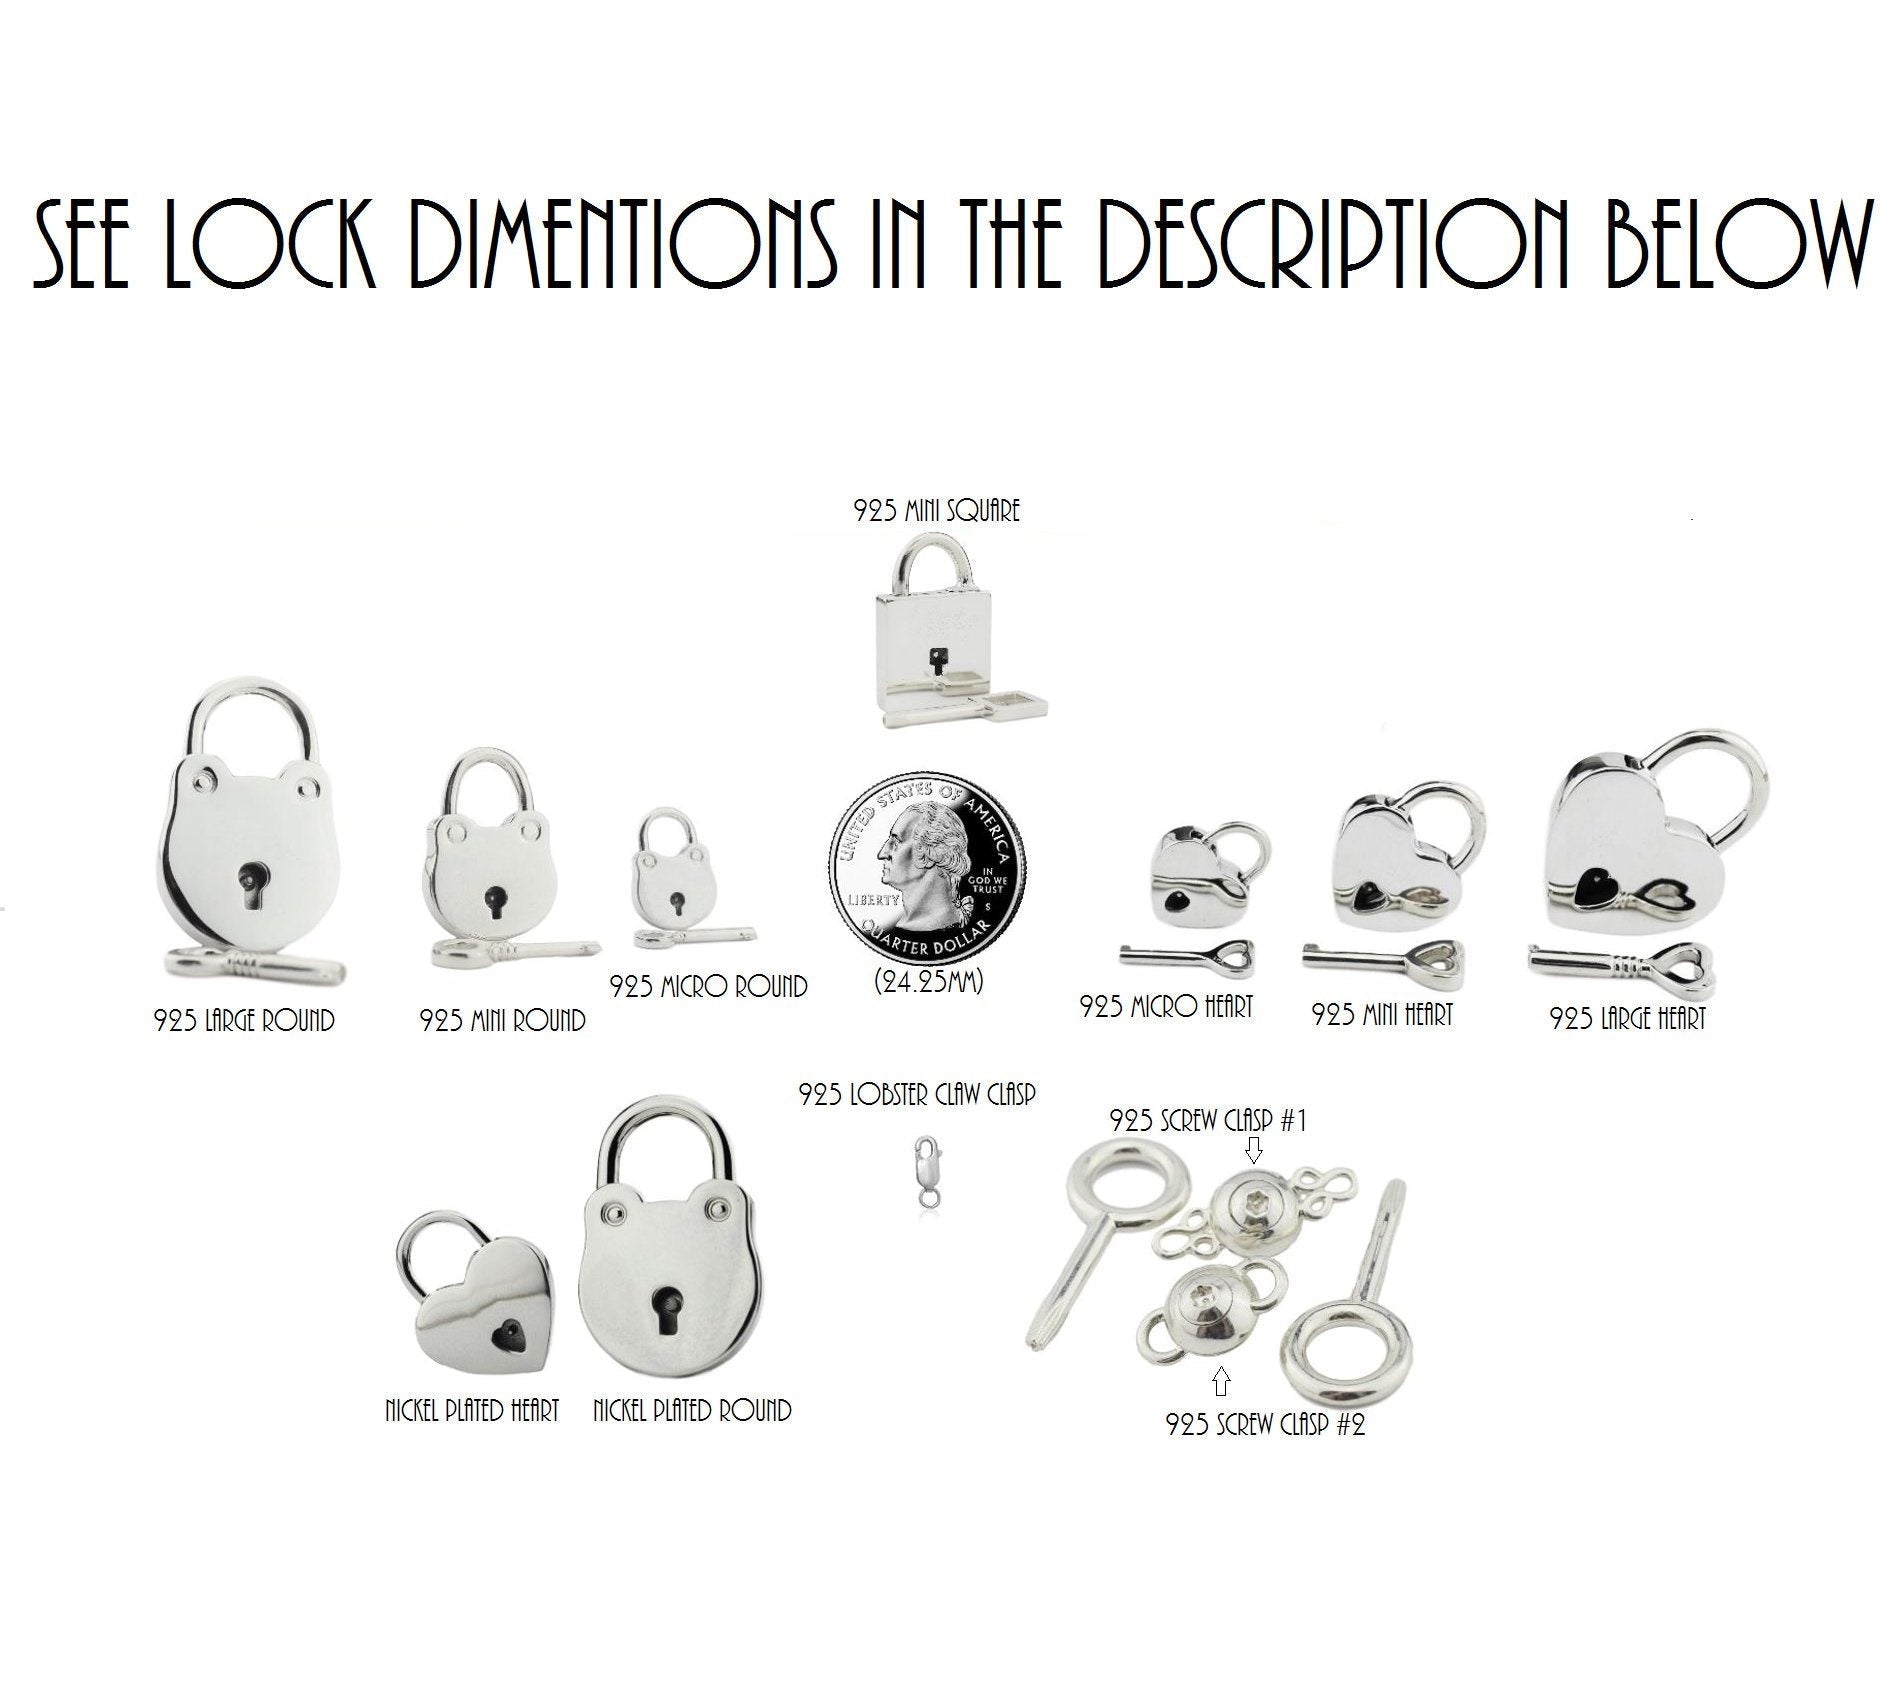 BDSM Lock listing of 6 to 13  different locks and our New Screw Lock that doesn't use an Alan or hex available in 316L Stainless steel or solid 925 Sterling Silver